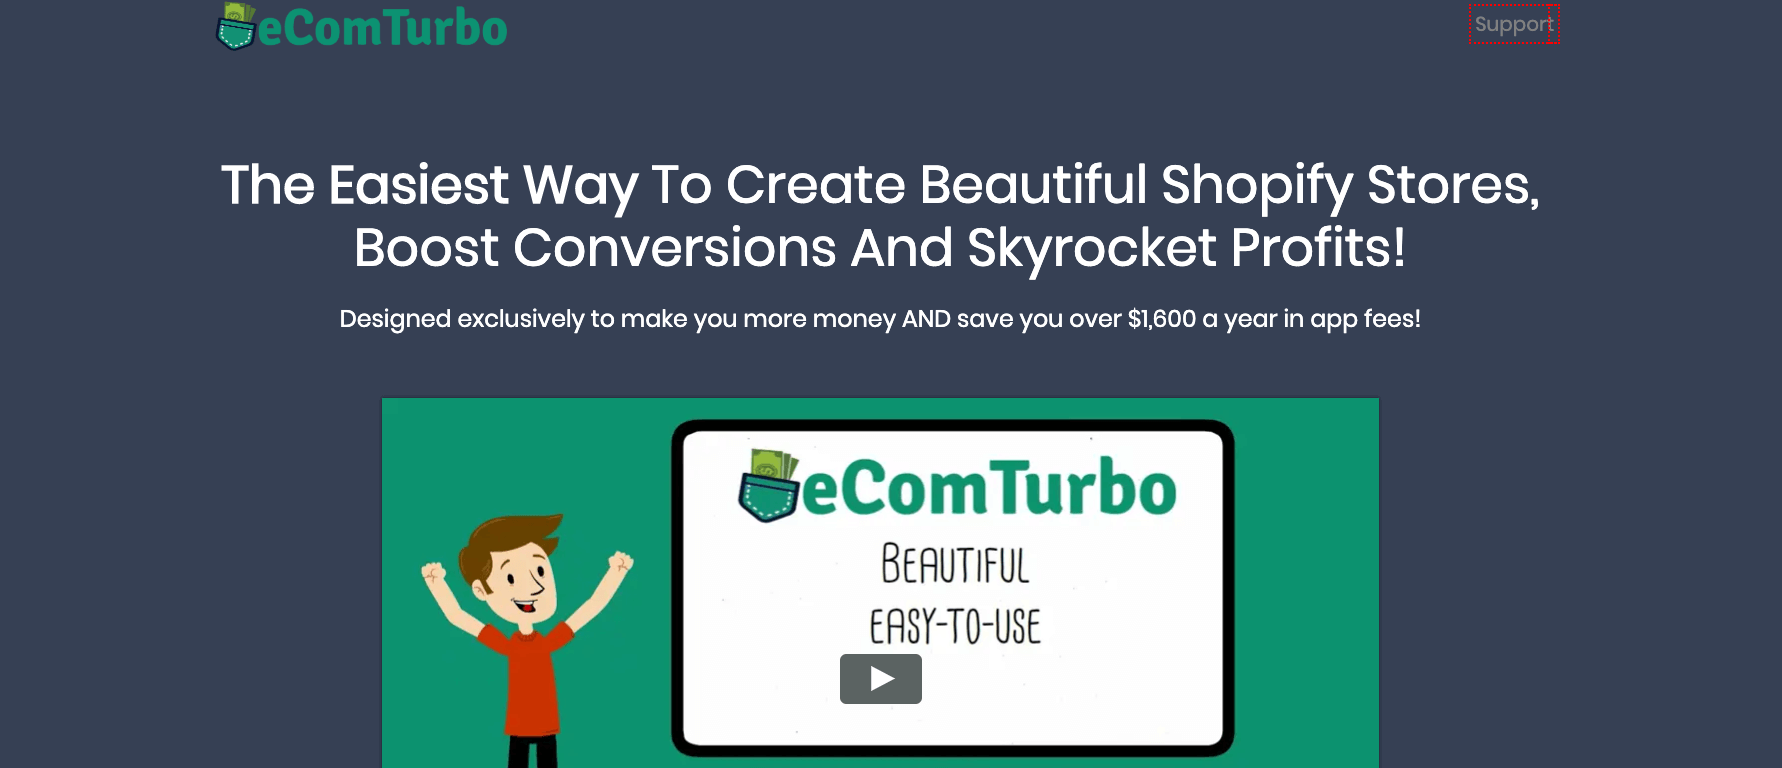 eCom Turbo Best Shopify Themes for Dropshipping